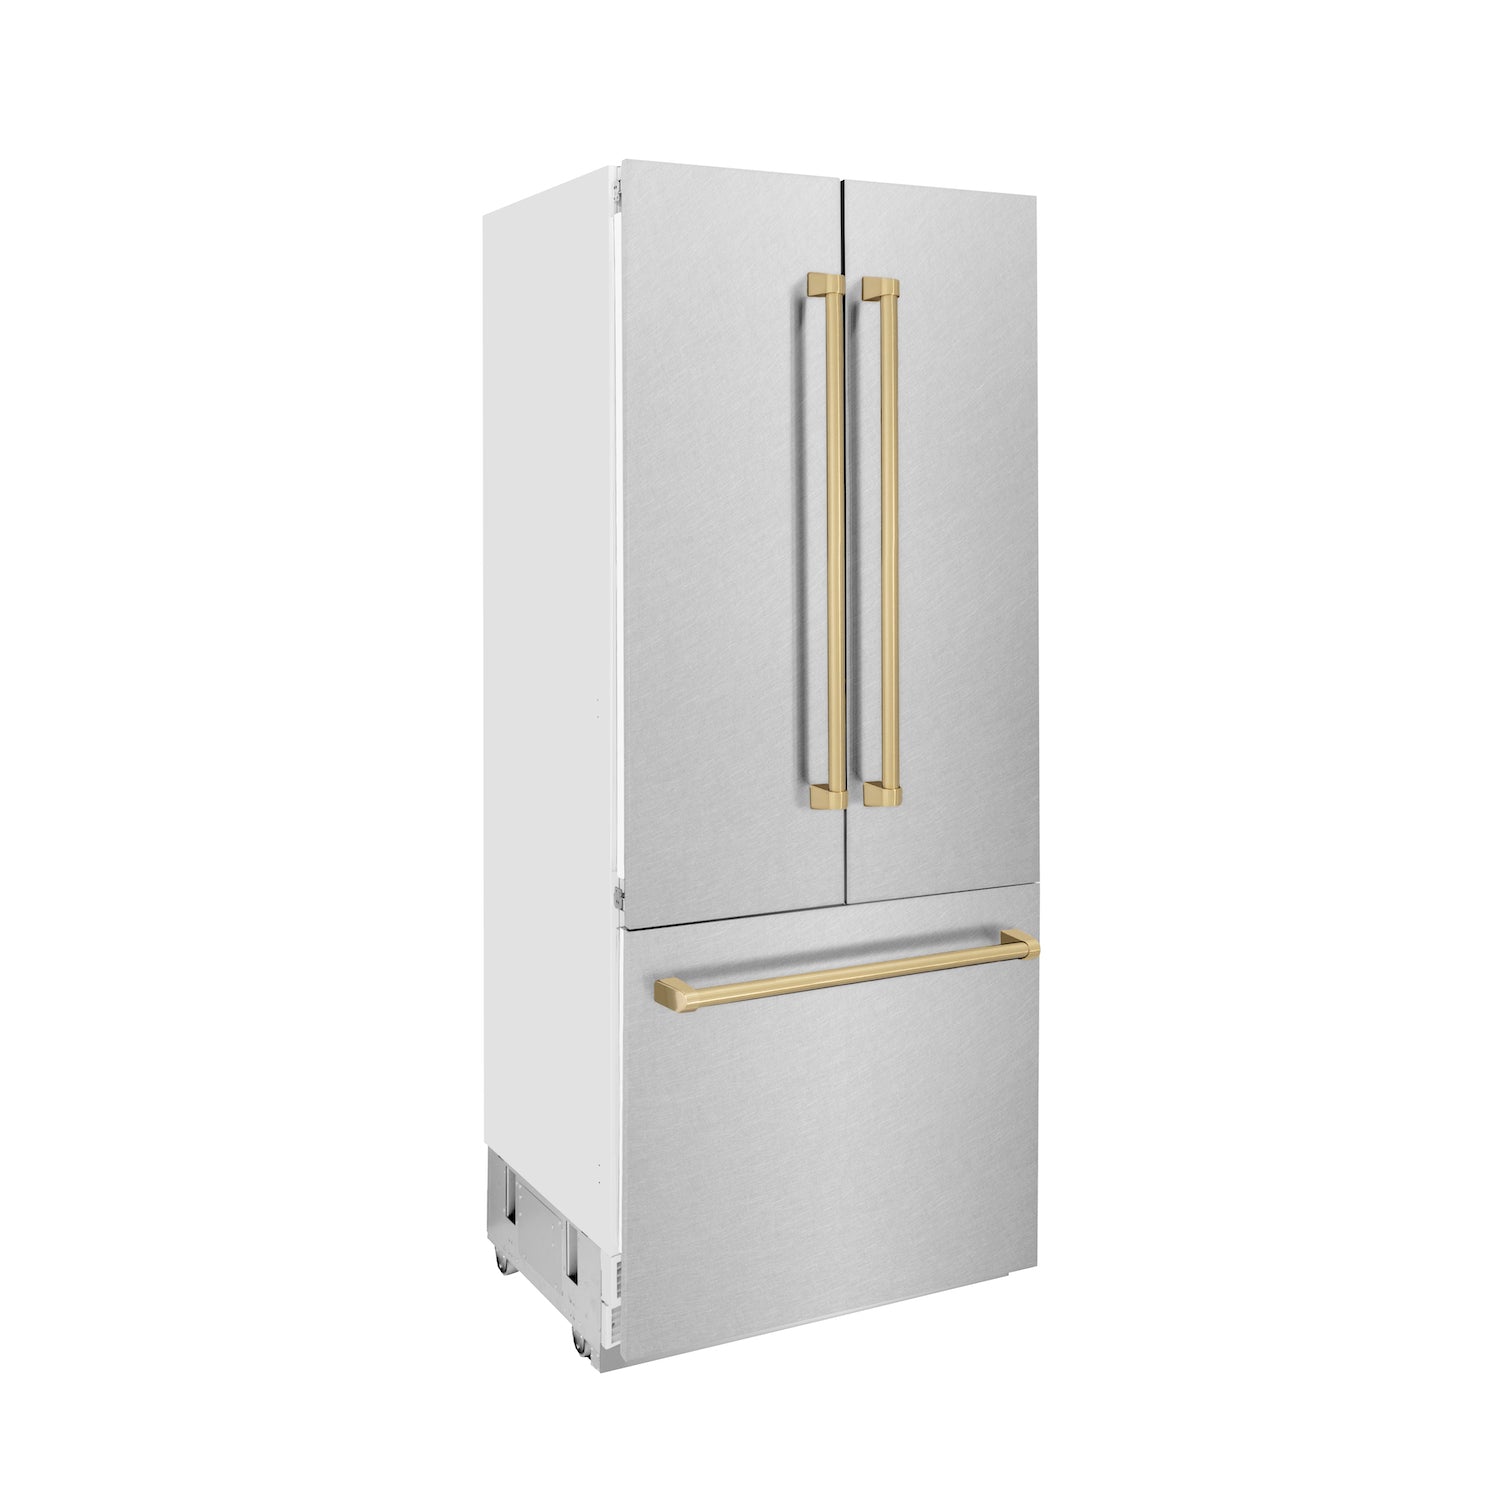 ZLINE Autograph Edition 36 in. 19.6 cu. ft. Built-in 2-Door Bottom Freezer Refrigerator with Internal Water and Ice Dispenser in Fingerprint Resistant Stainless Steel with Champagne Bronze Accents (RBIVZ-SN-36-CB) side.